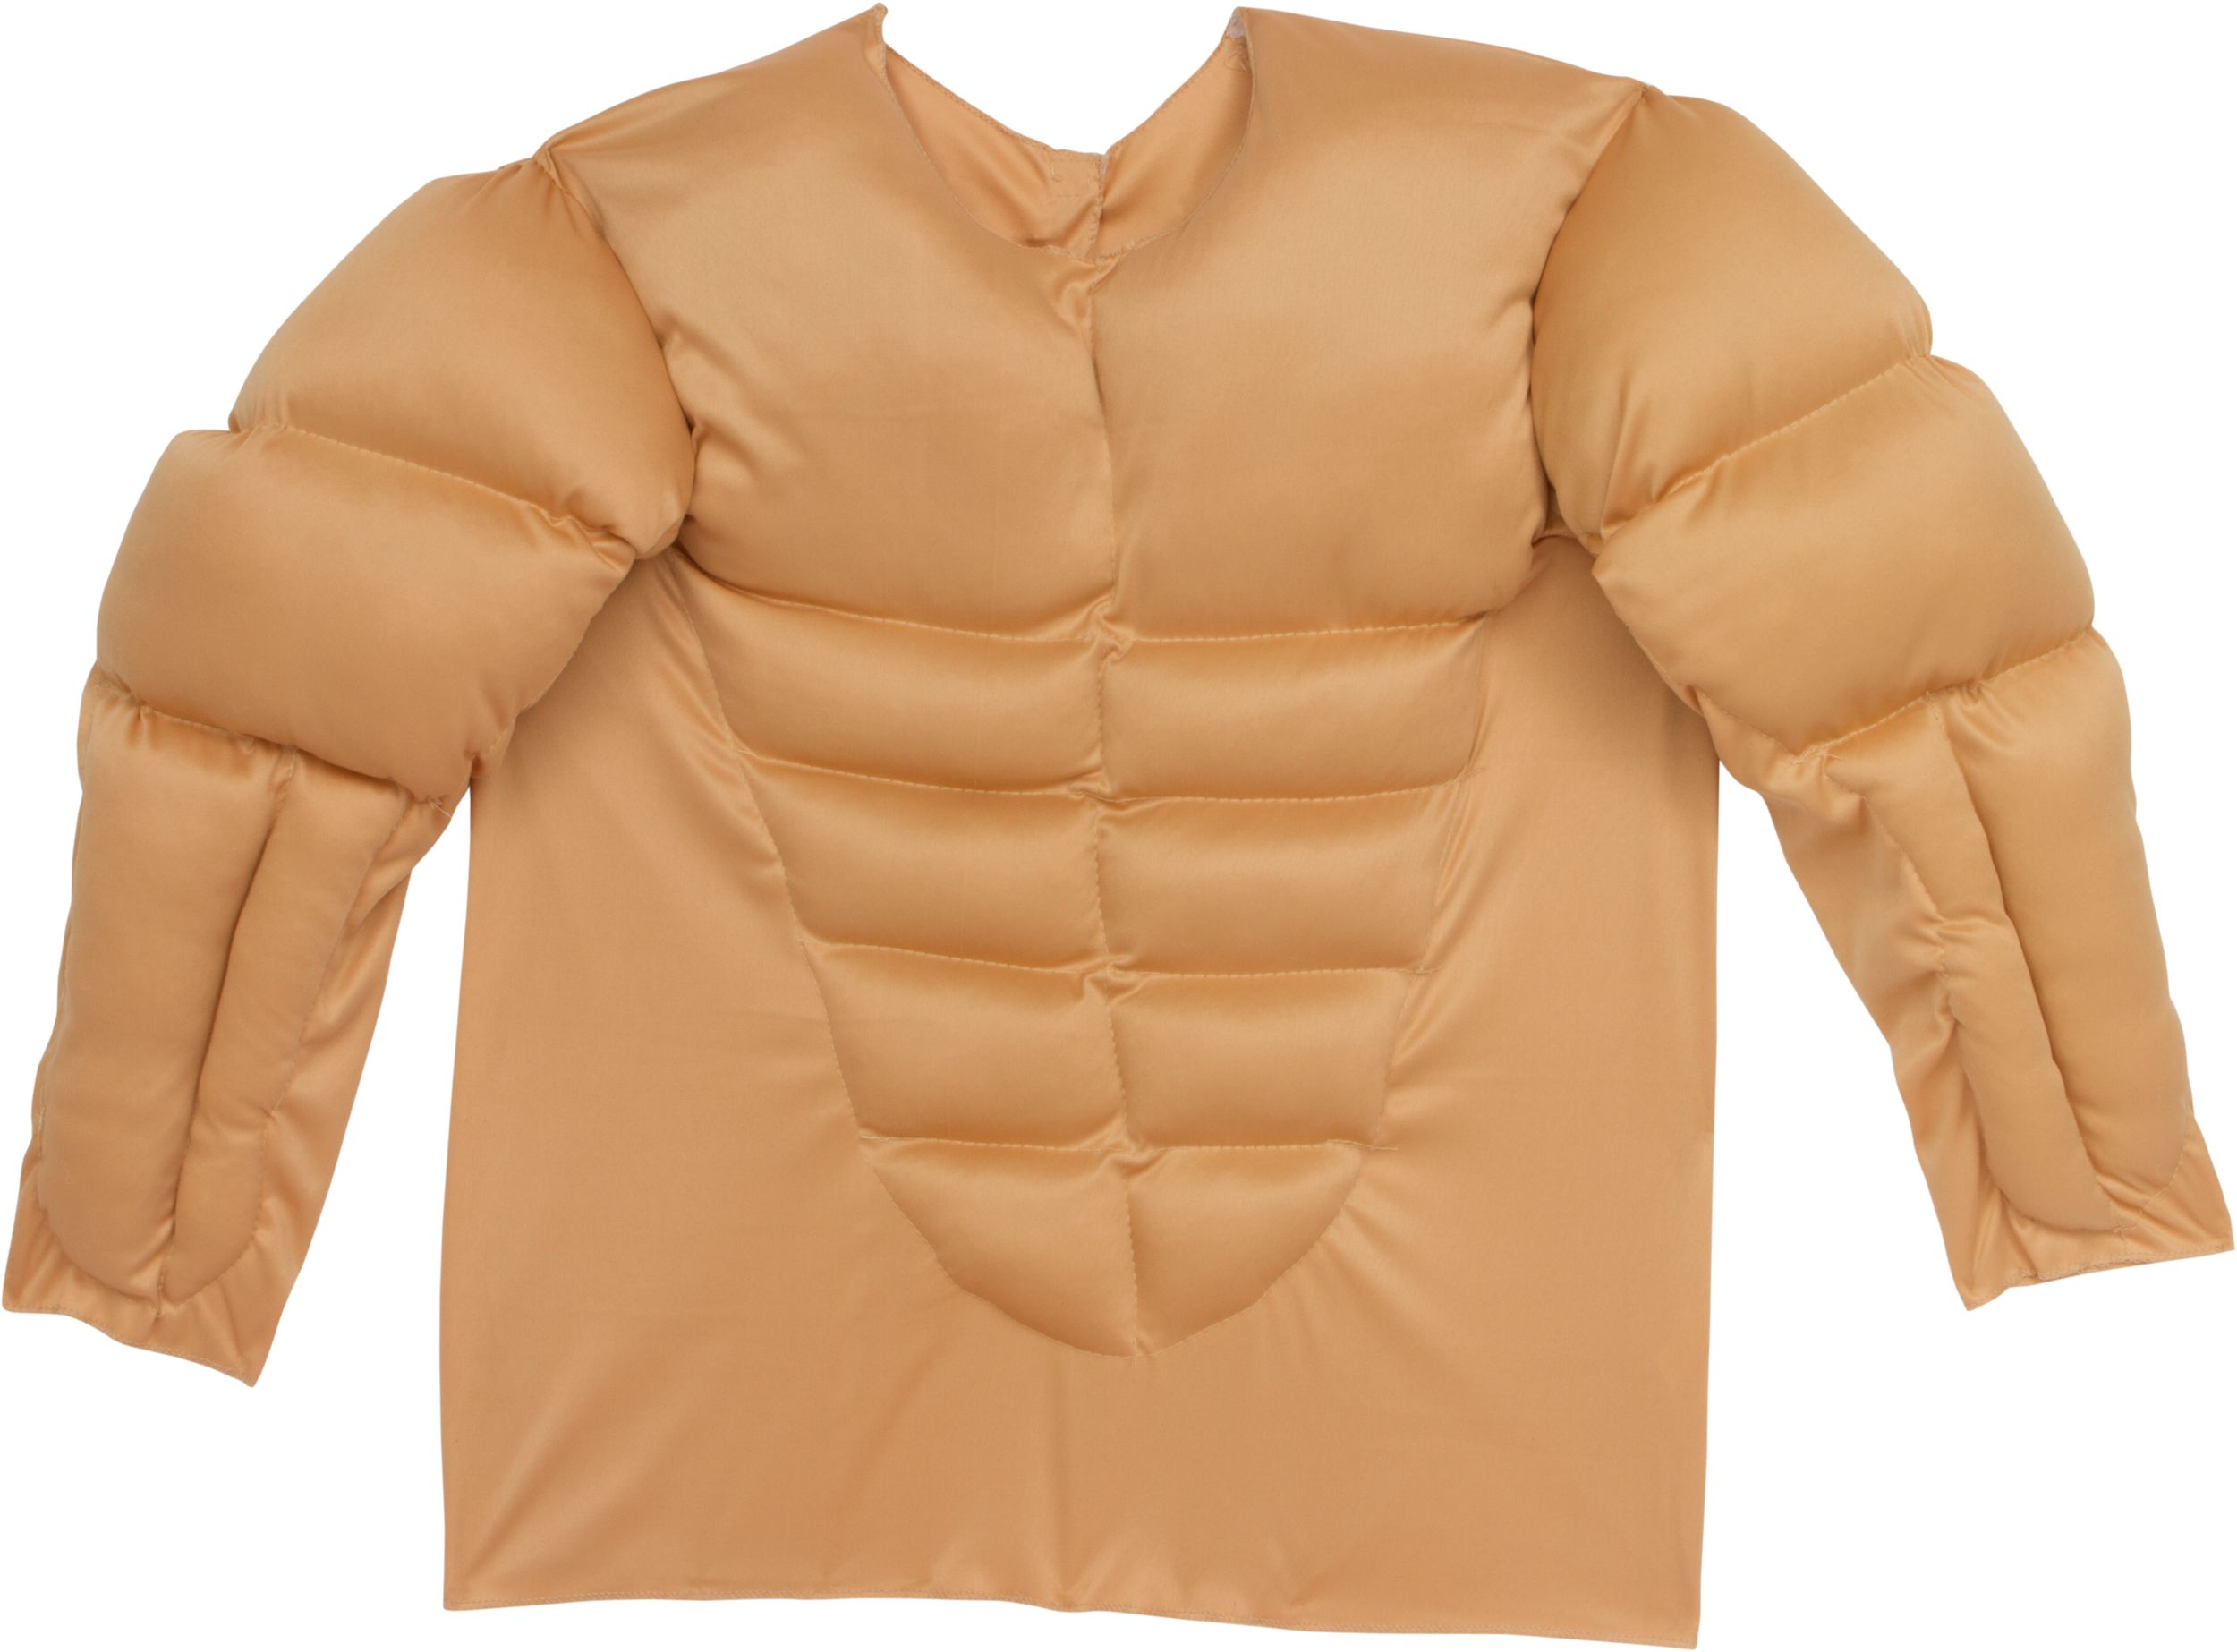 Adult Padded Muscle Long Sleeve Shirt, Beige, One Size, Wearable Costume  Accessory for Halloween